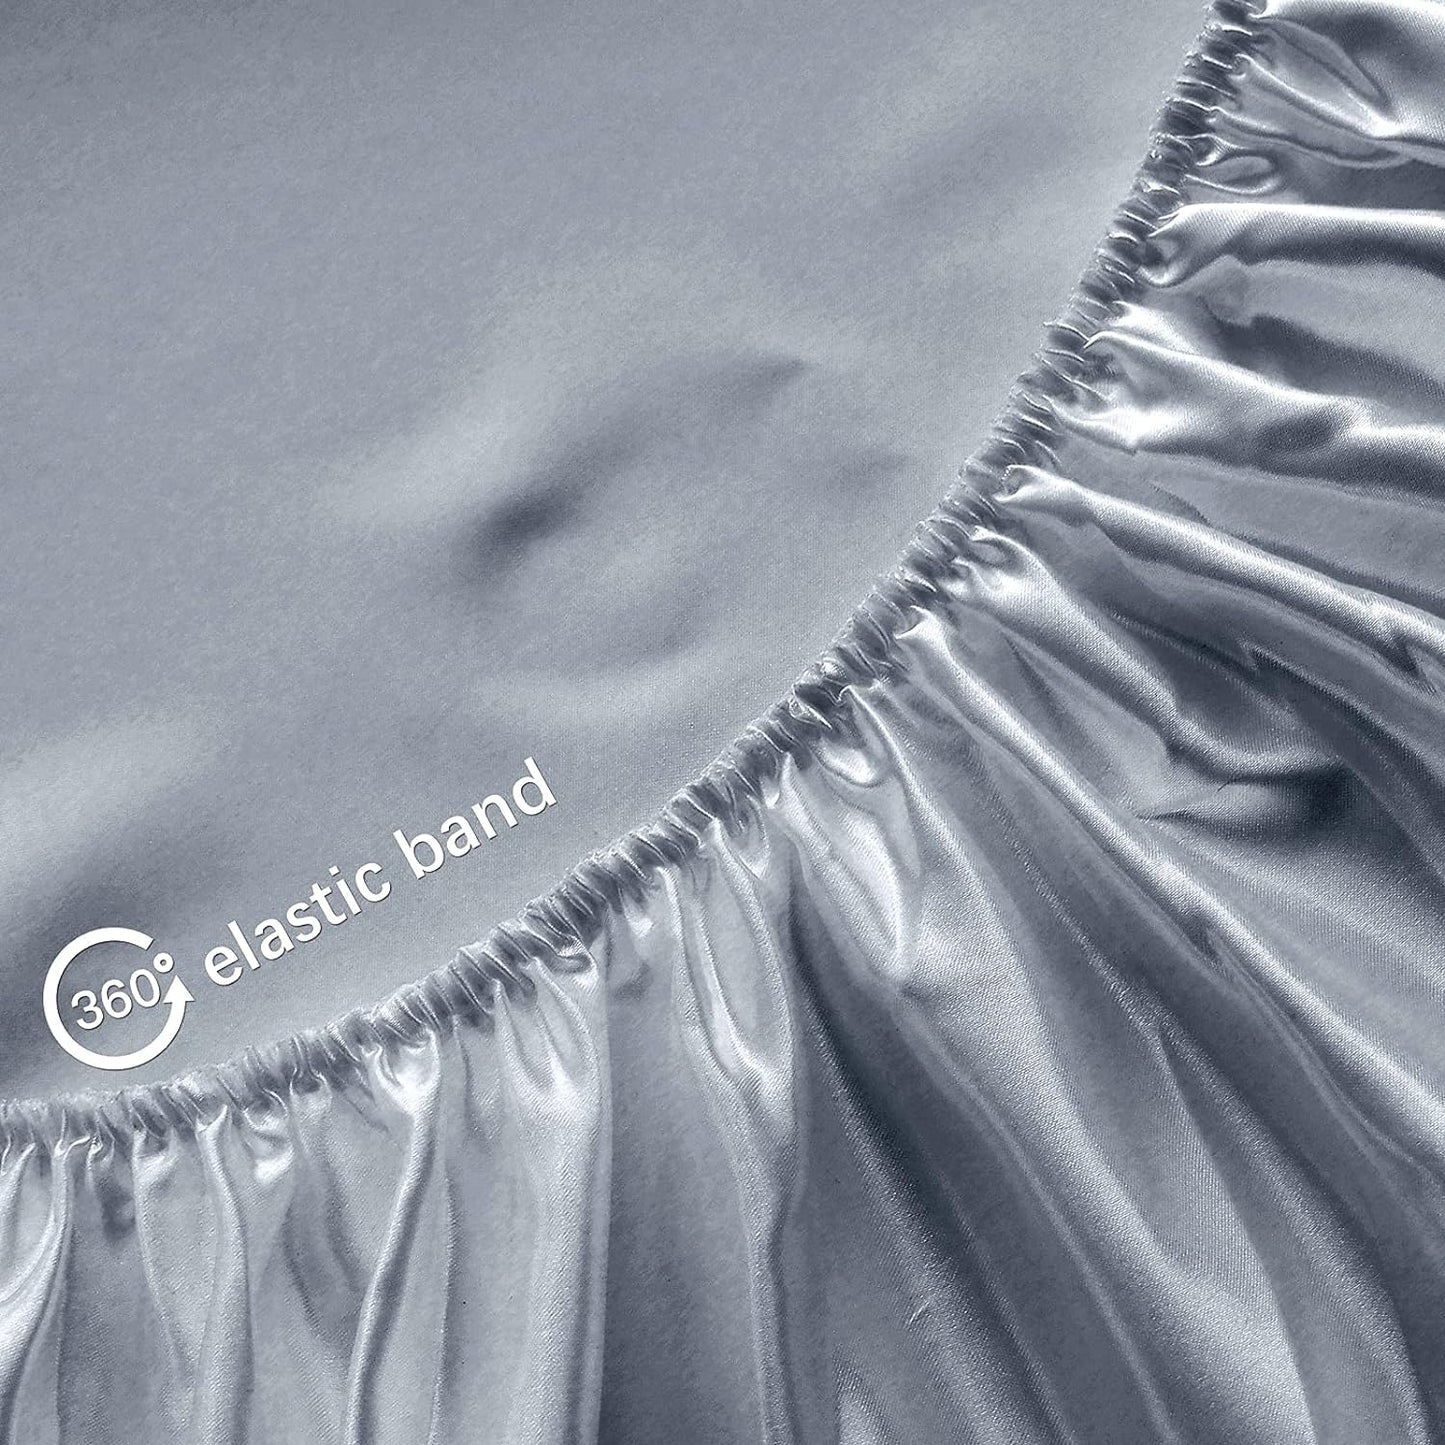 Satin Bassinet Sheet - Fits Halo BassiNest Swivel, Flex, Glide, Premiere & Luxe Series Sleeper, 2 Pack, Super Soft and Silky